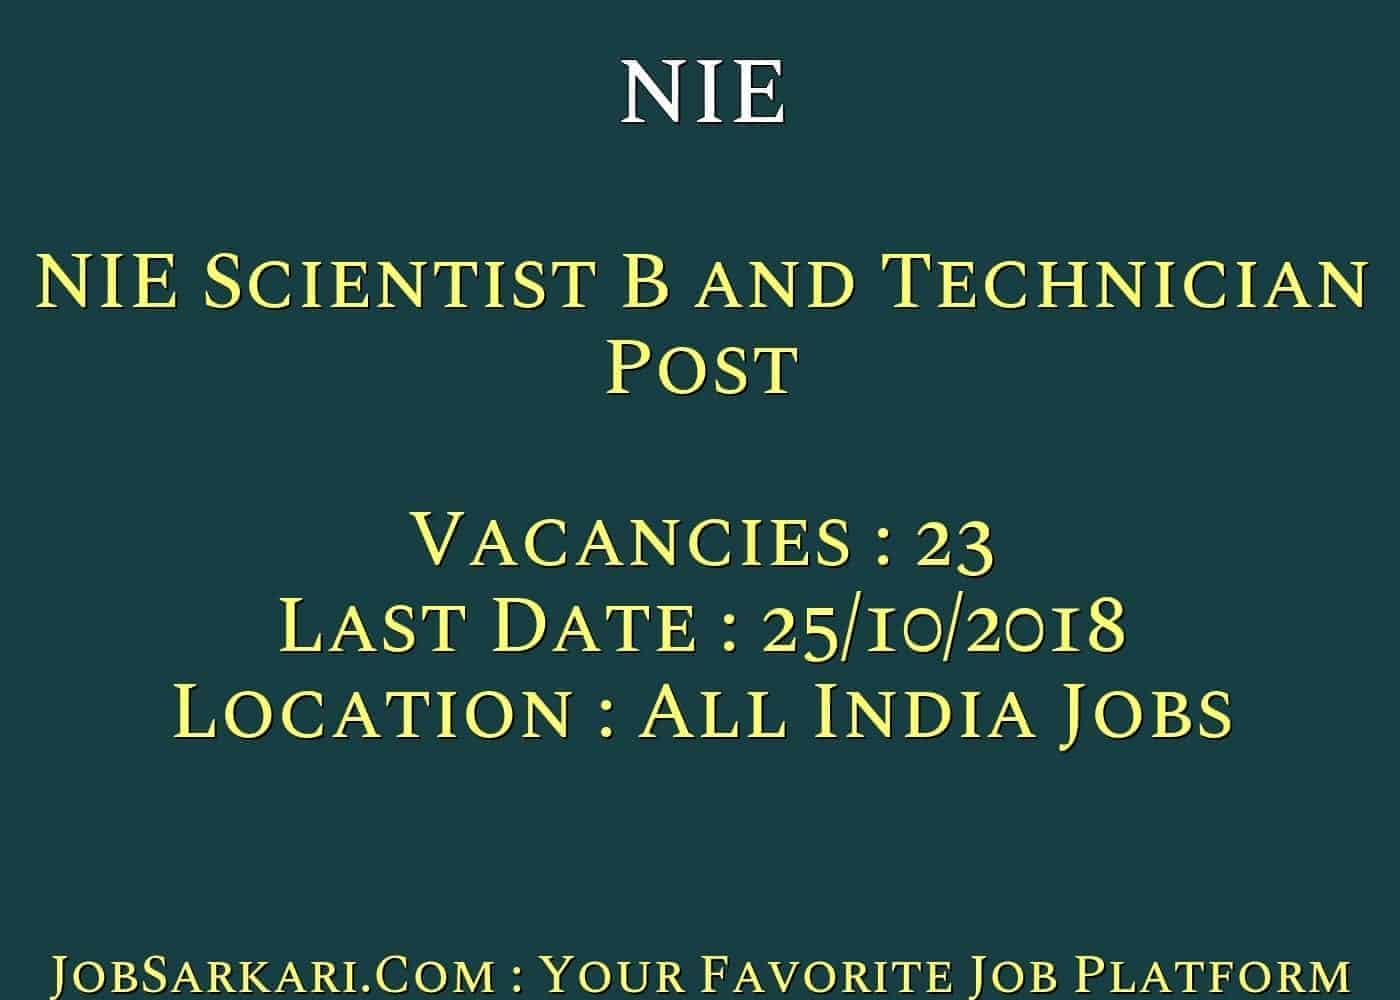 NIE Recruitment 2018 for Scientist B and Technician Post